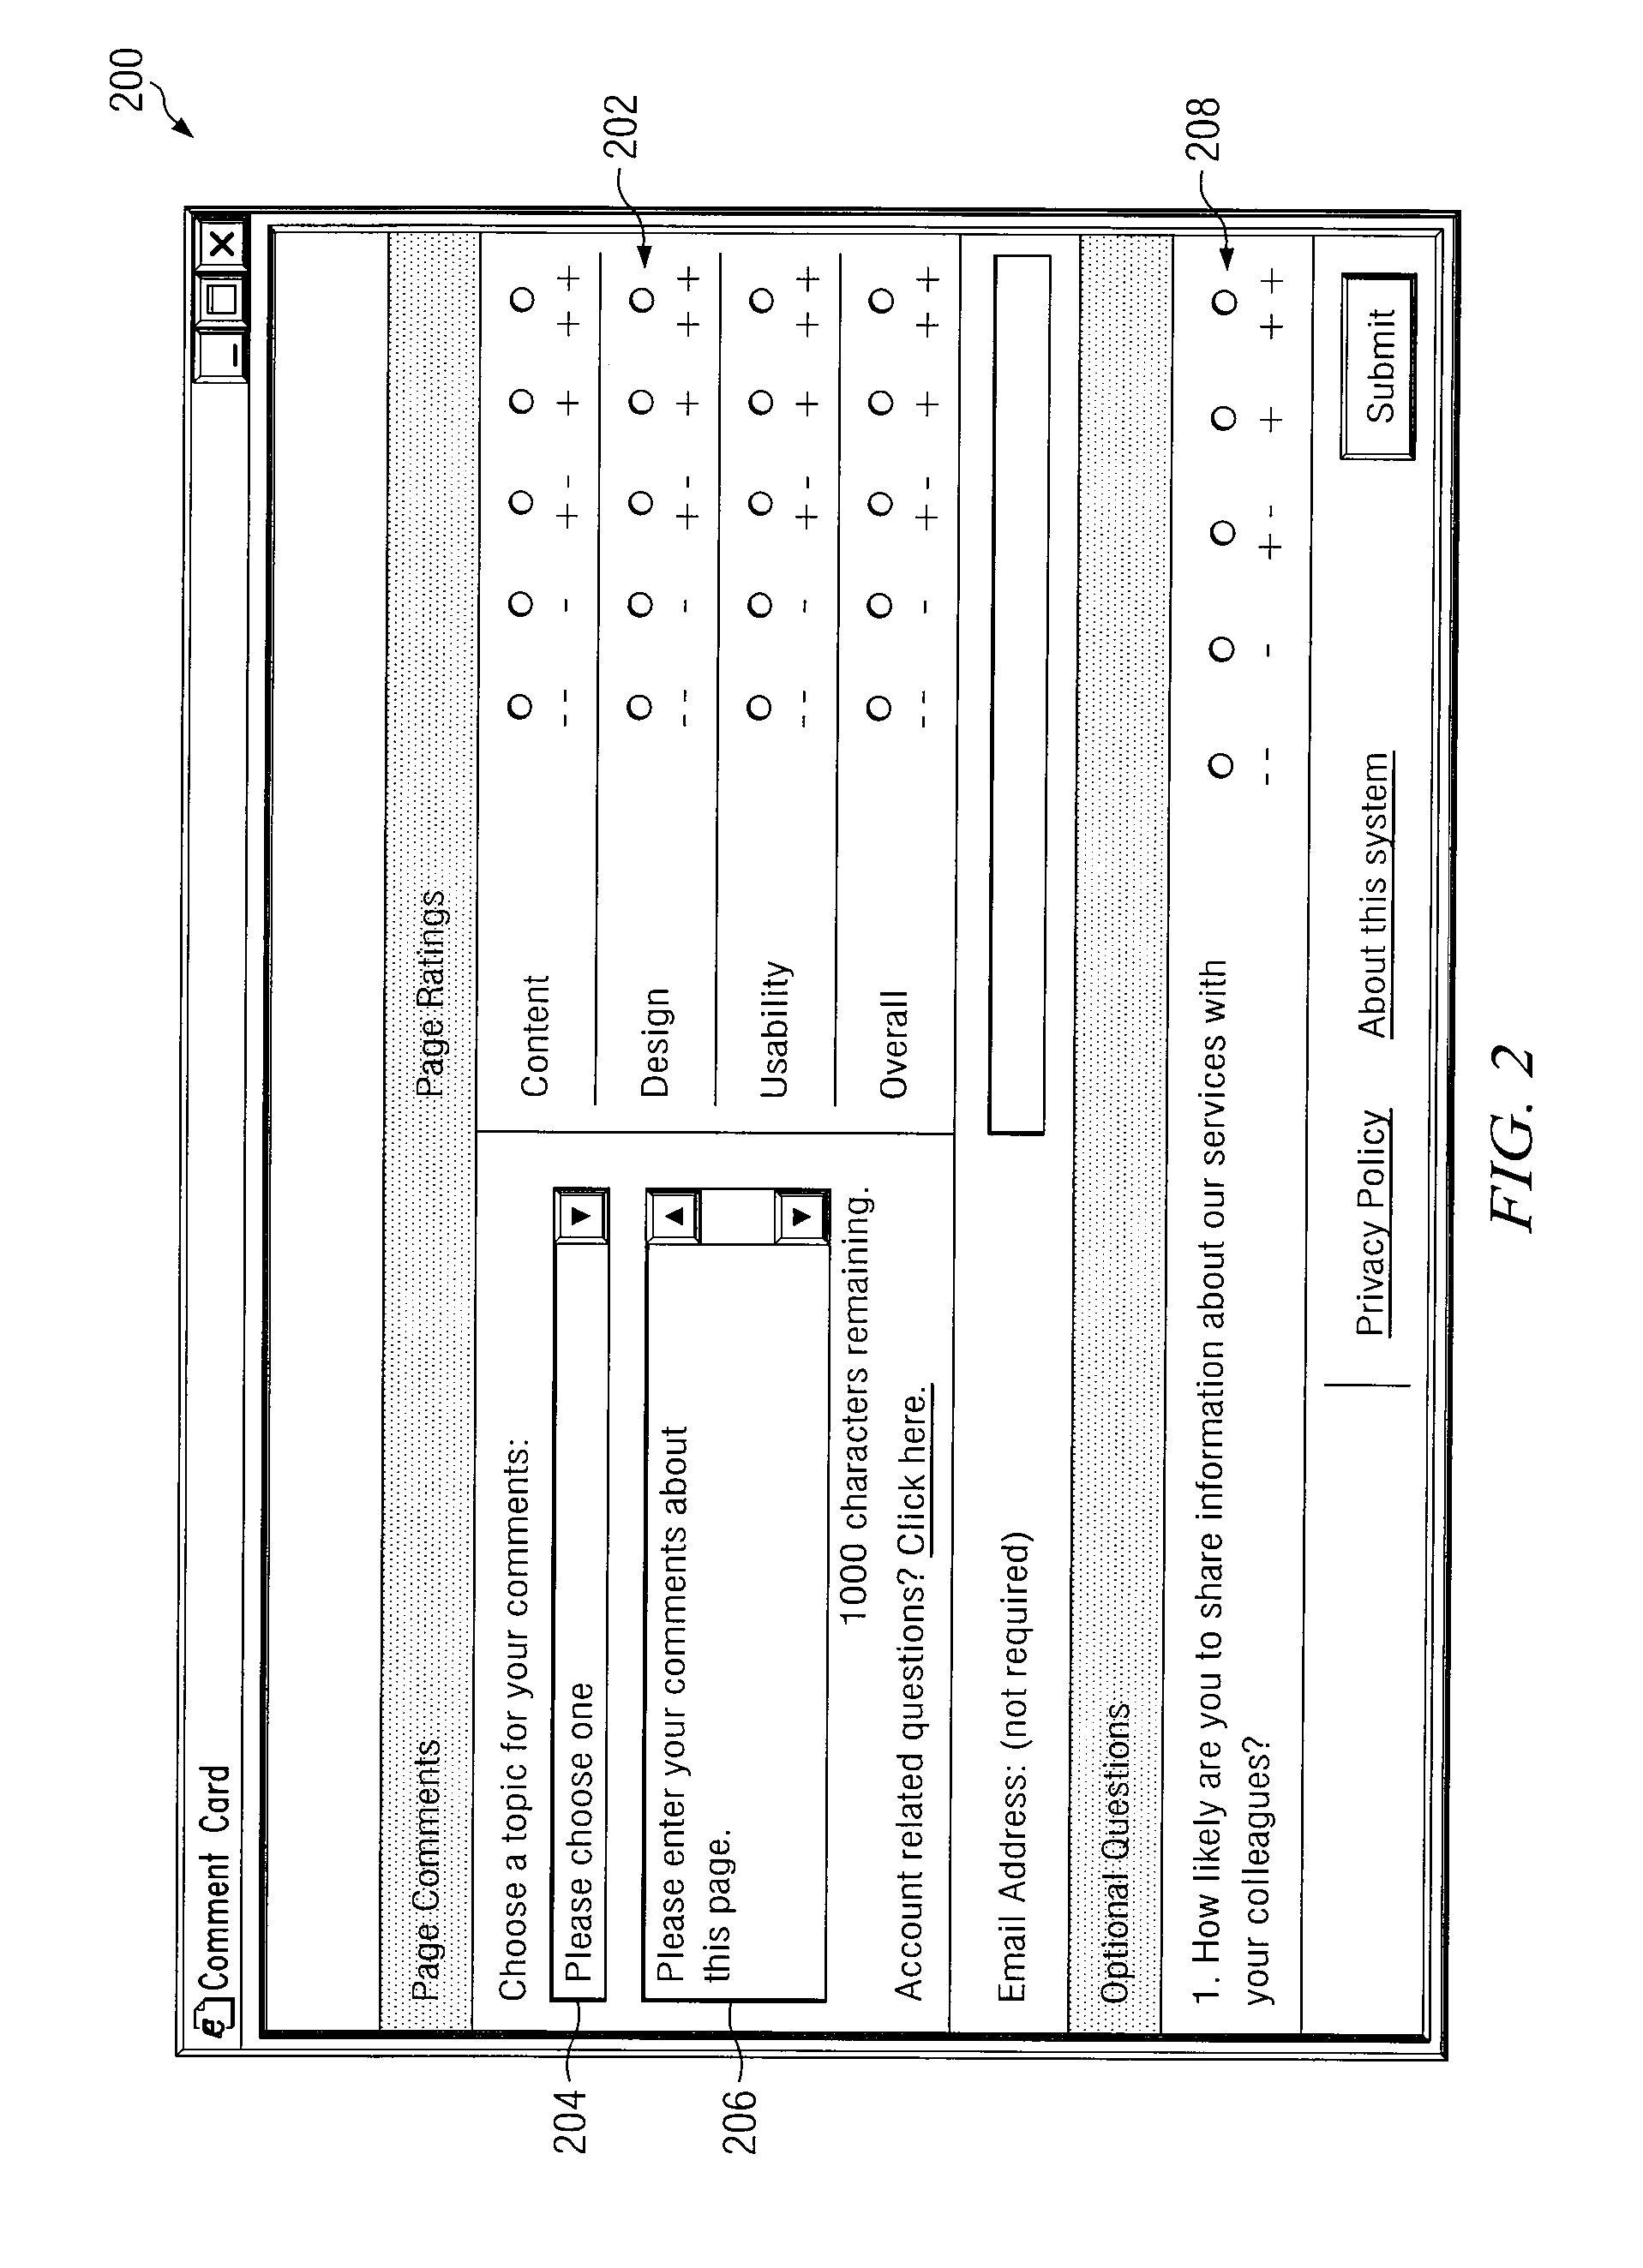 Computer-implemented system and method for measuring and reporting business intelligence based on comments collected from web page users using software associated with accessed web pages